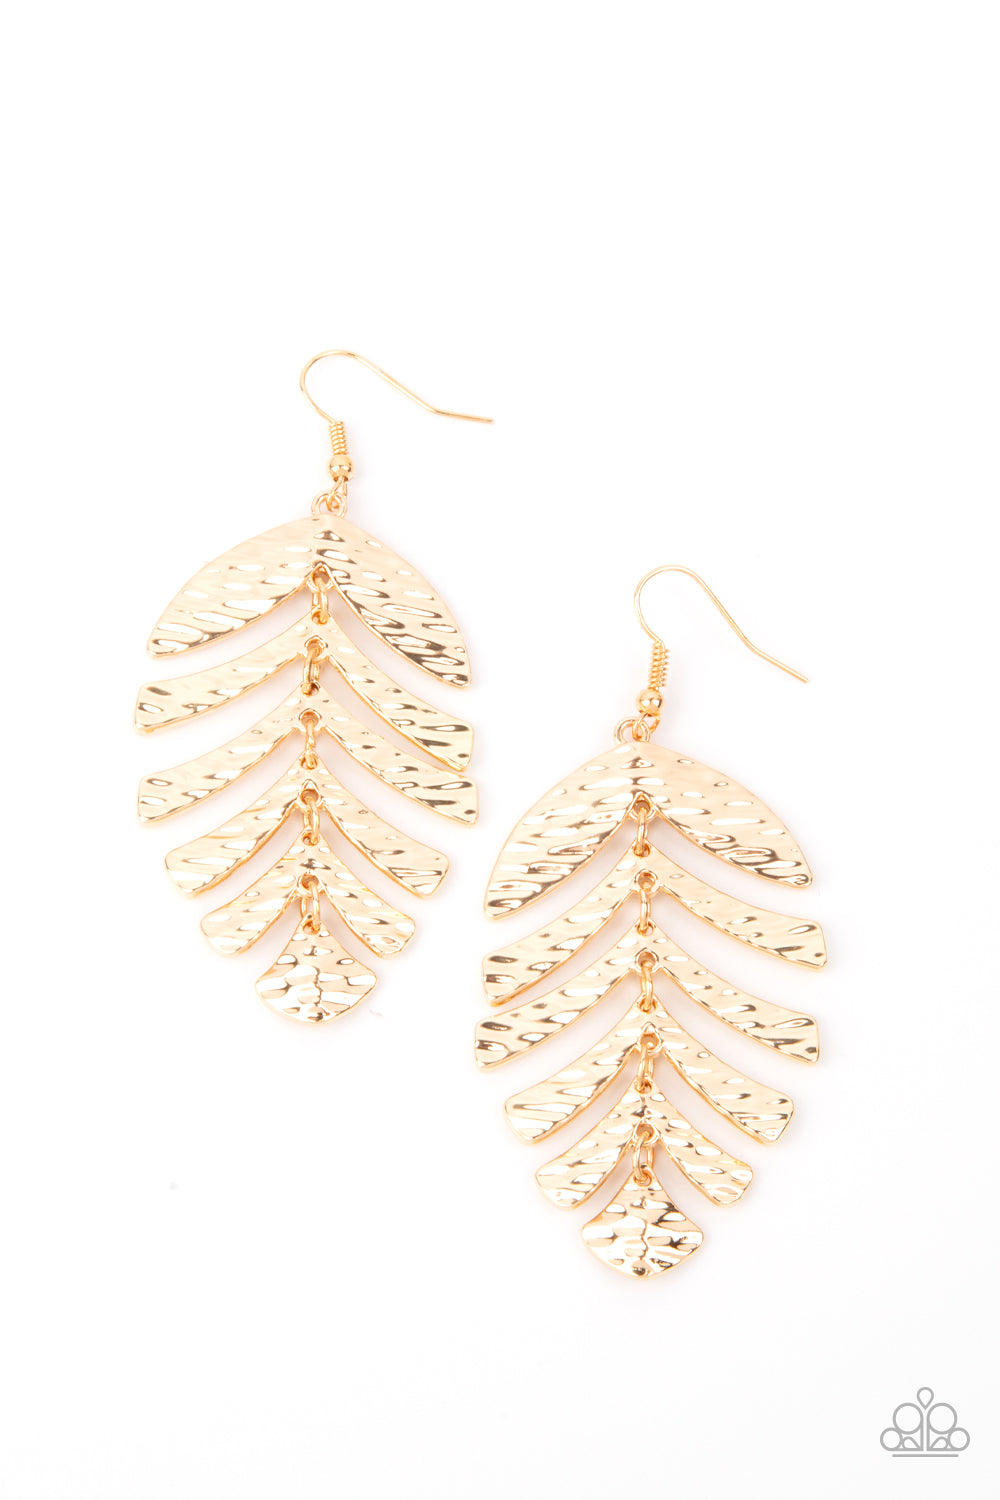 Paparazzi Accessories Palm Lagoon - Gold Earrings - Lady T Accessories